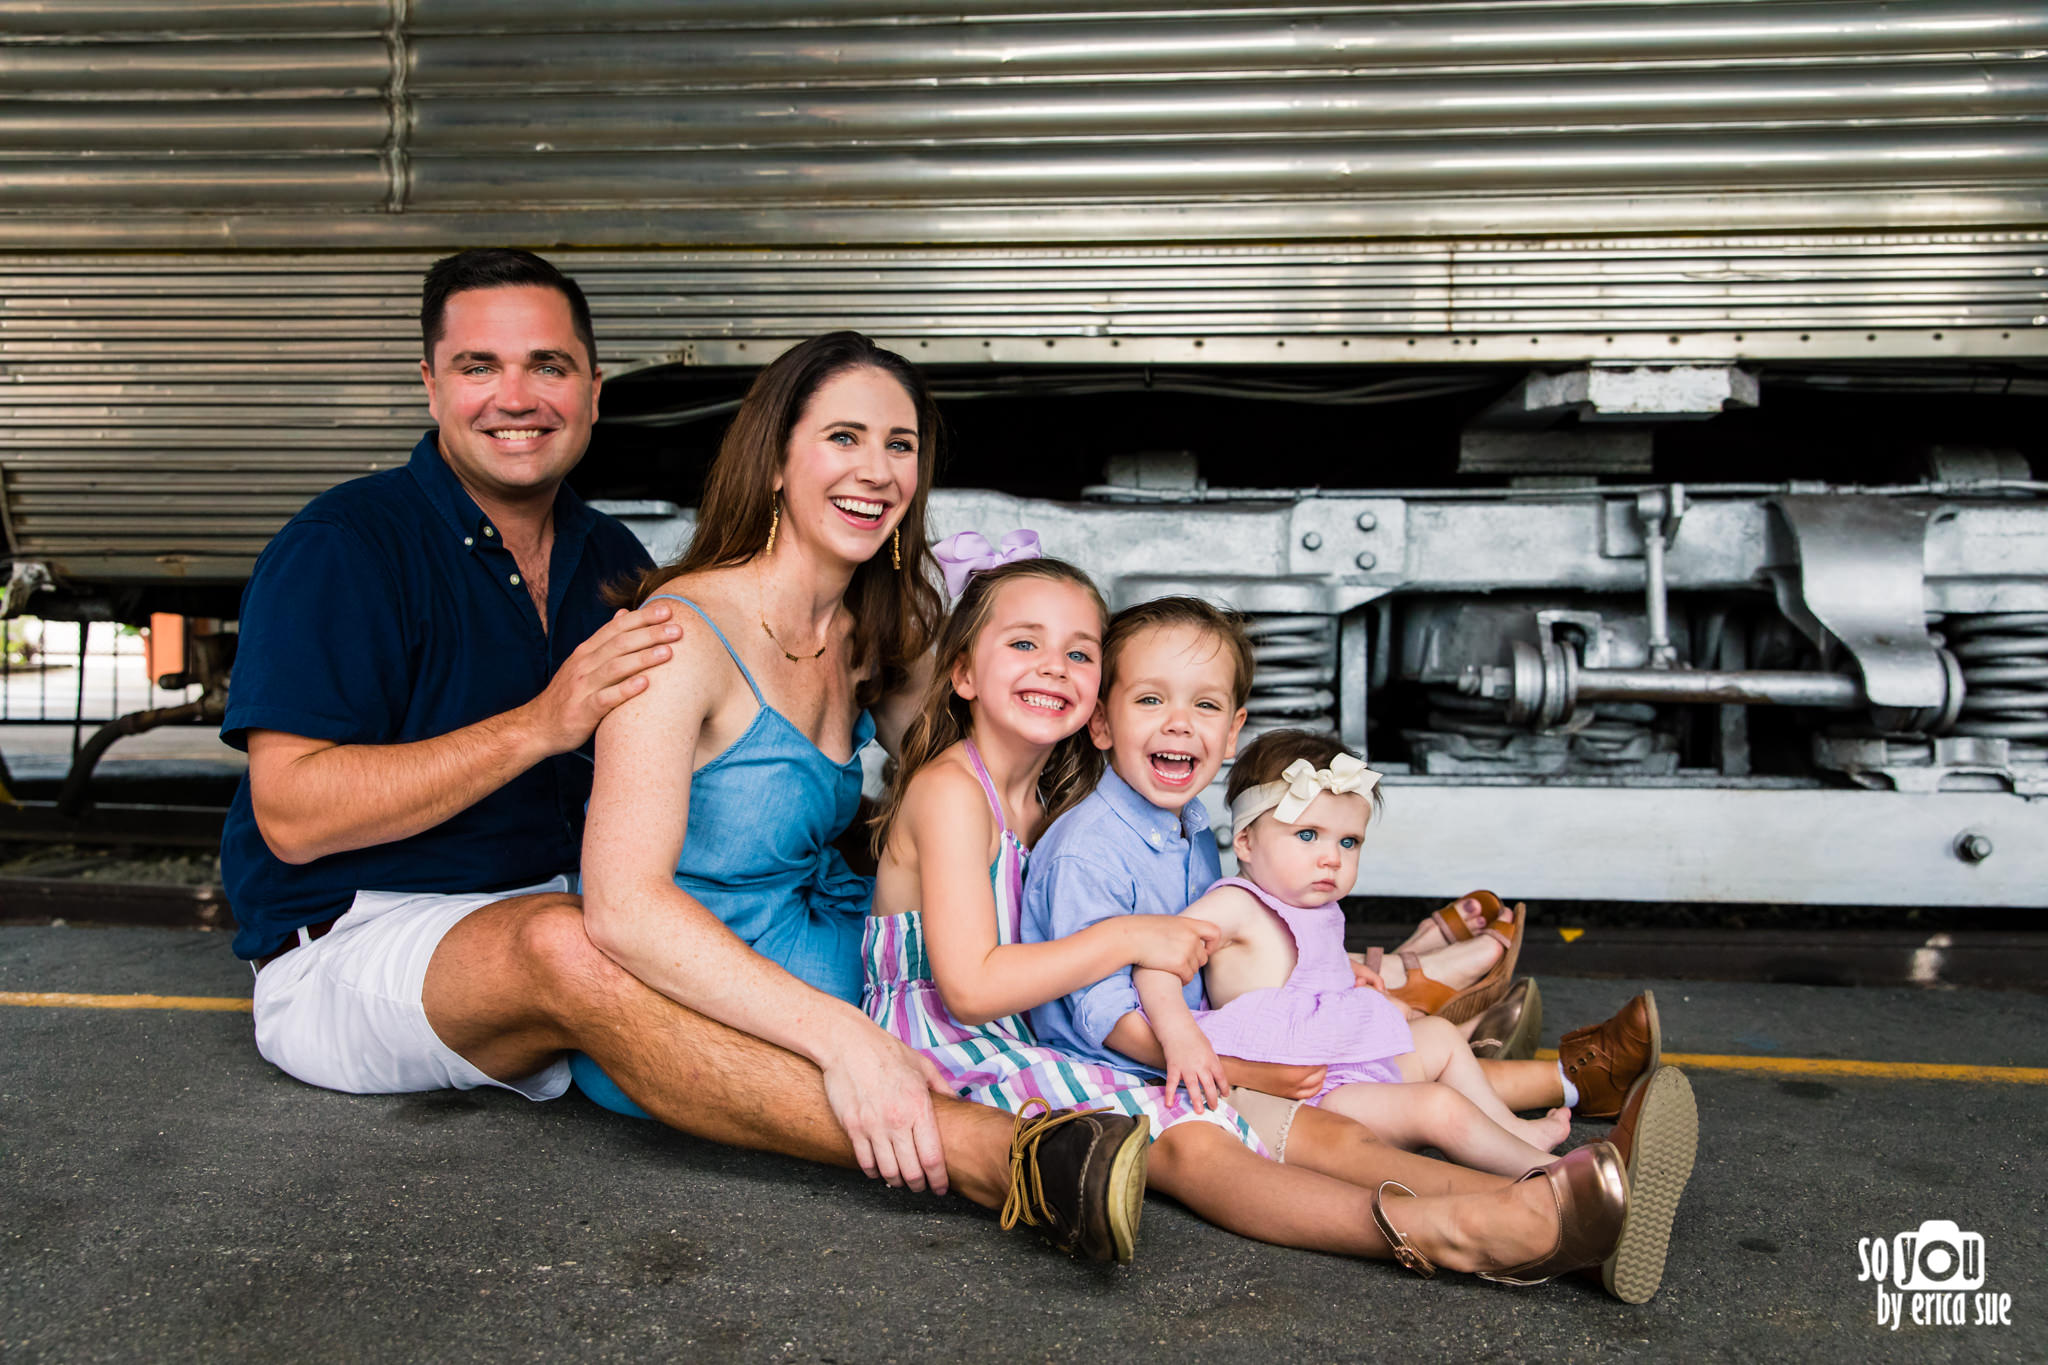 so-you-by-erica-sue-gold-coast-railroad-museum-miami-family-photo-shoot-session-6885.JPG